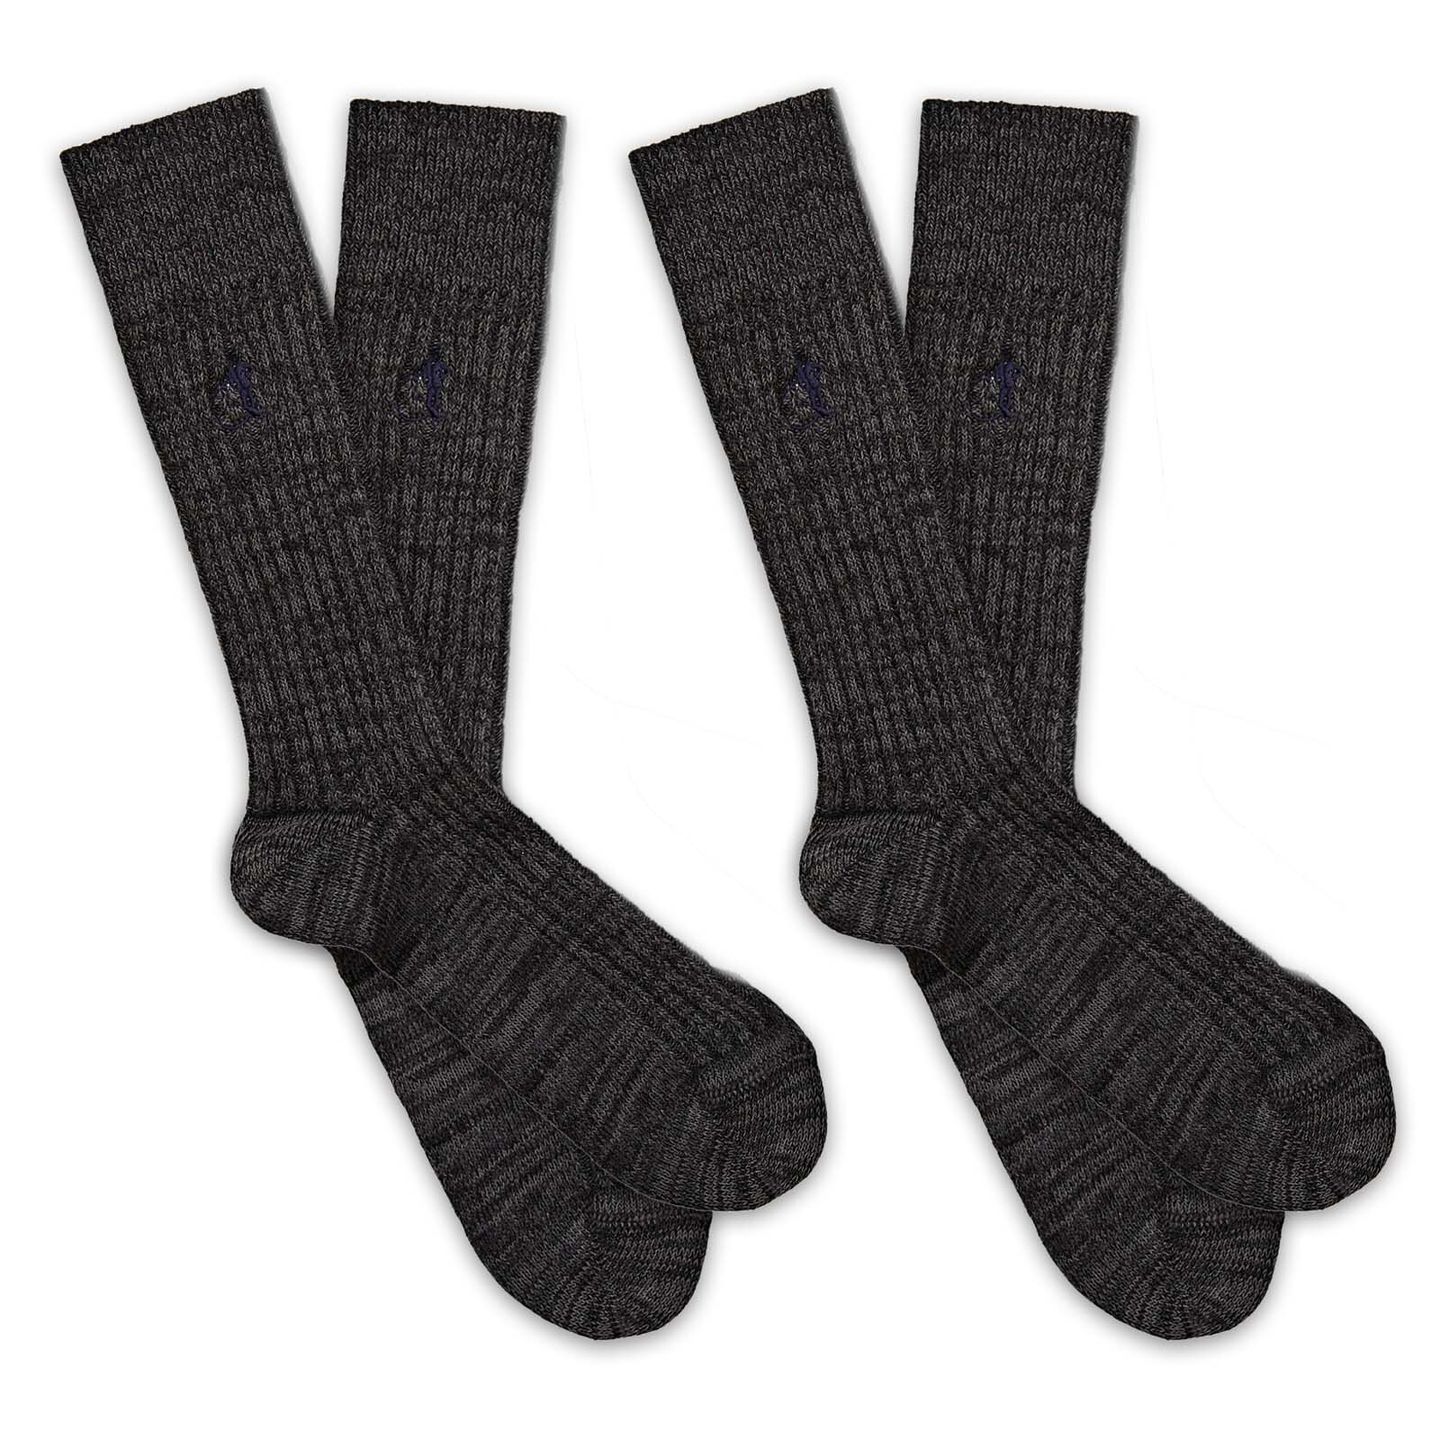 2 pair of grey socks next to each other